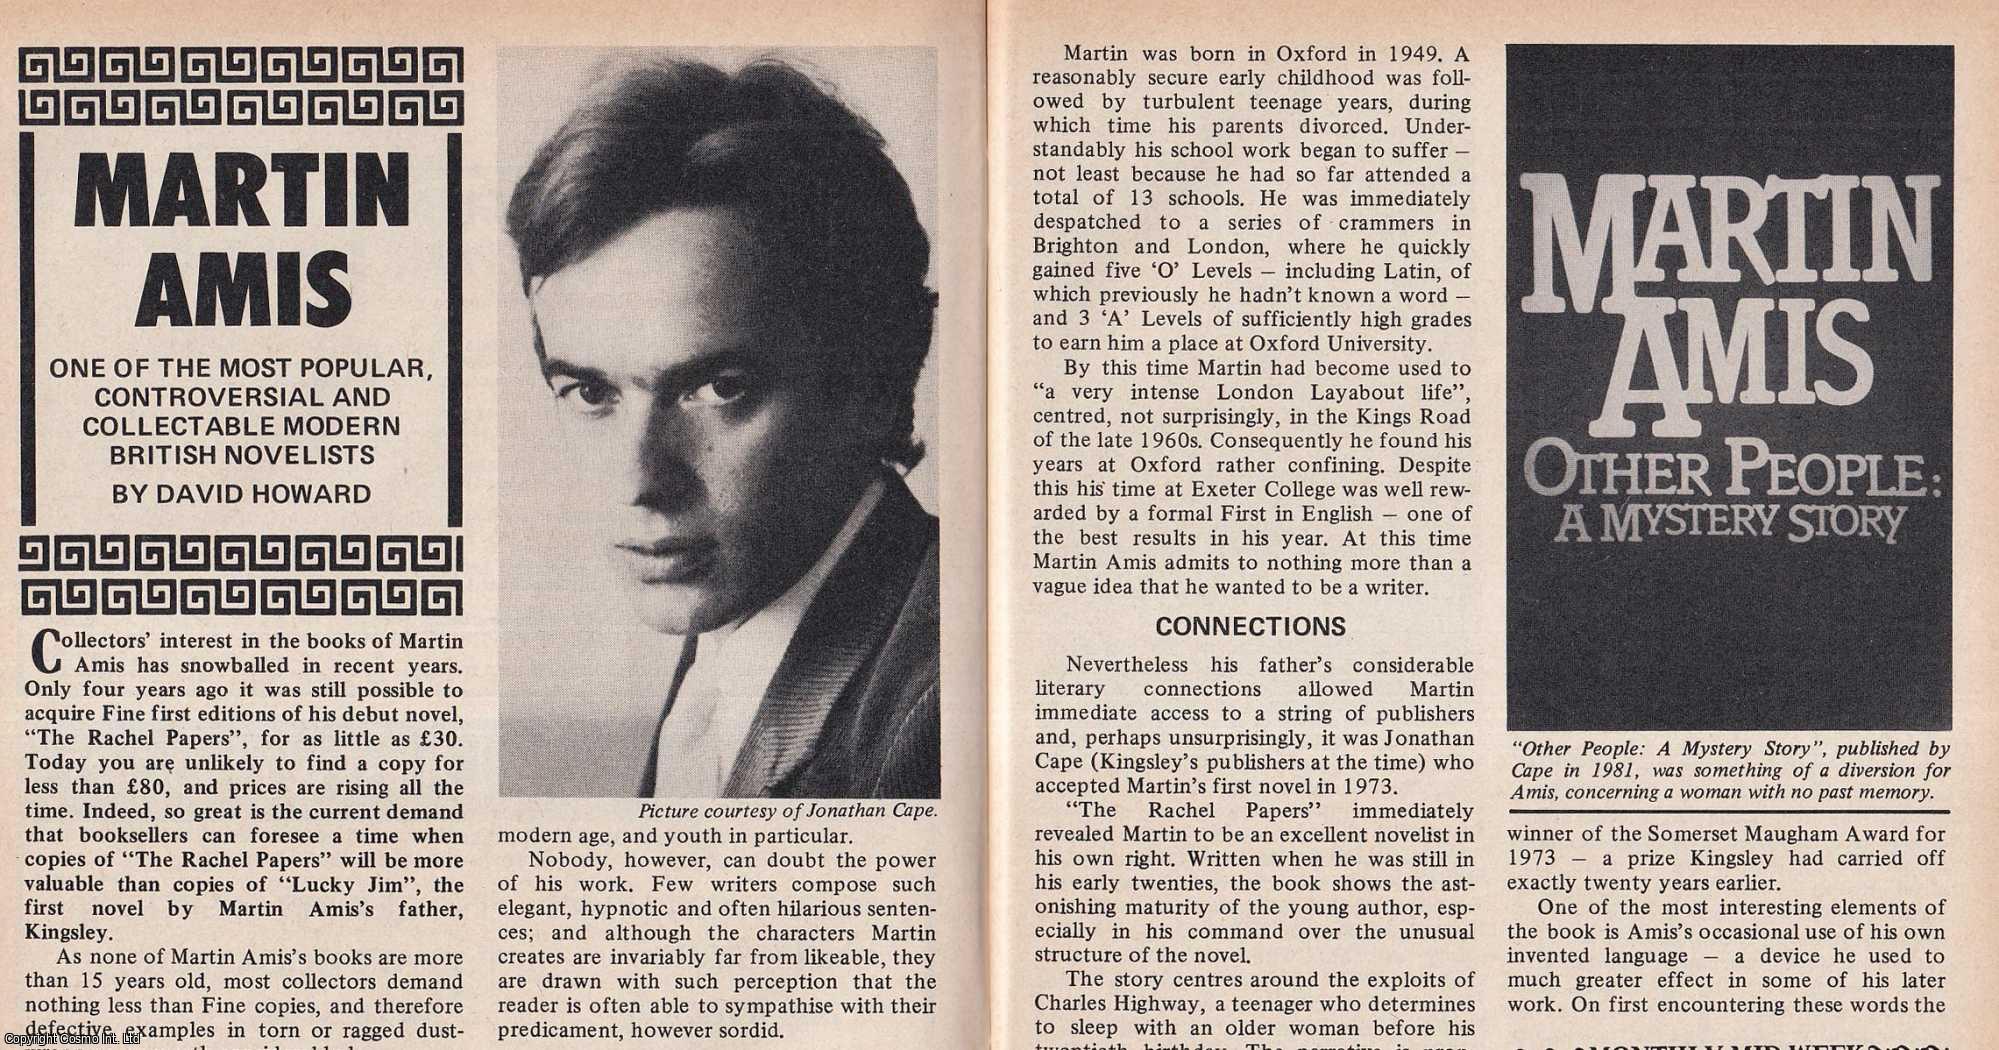 David Howard - Martin Amis : Collectable Modern British Novelist. This is an original article separated from an issue of The Book & Magazine Collector publication, 1988.